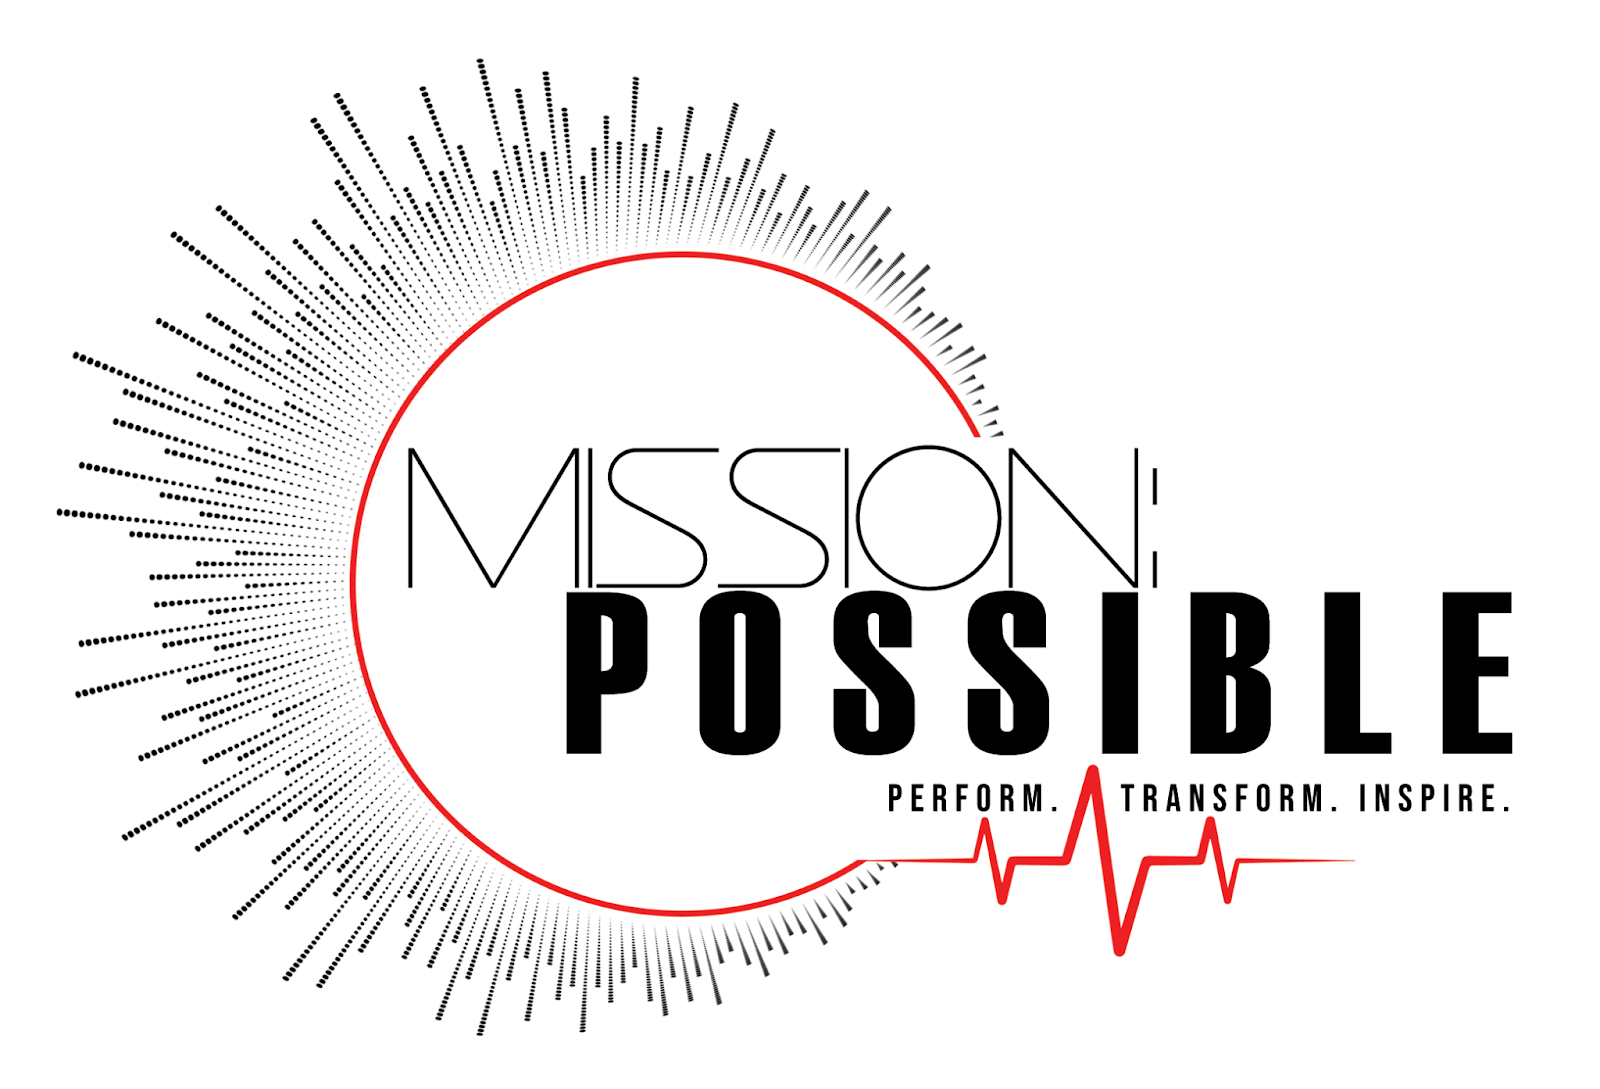 Mission Possible: Perform. Transform. Inspire.